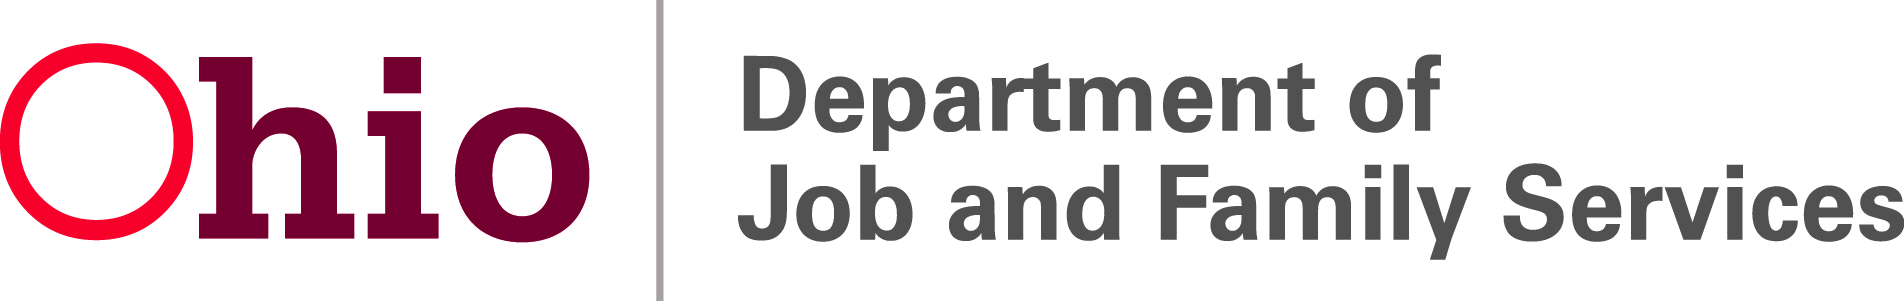 Richland county dept of job and family services